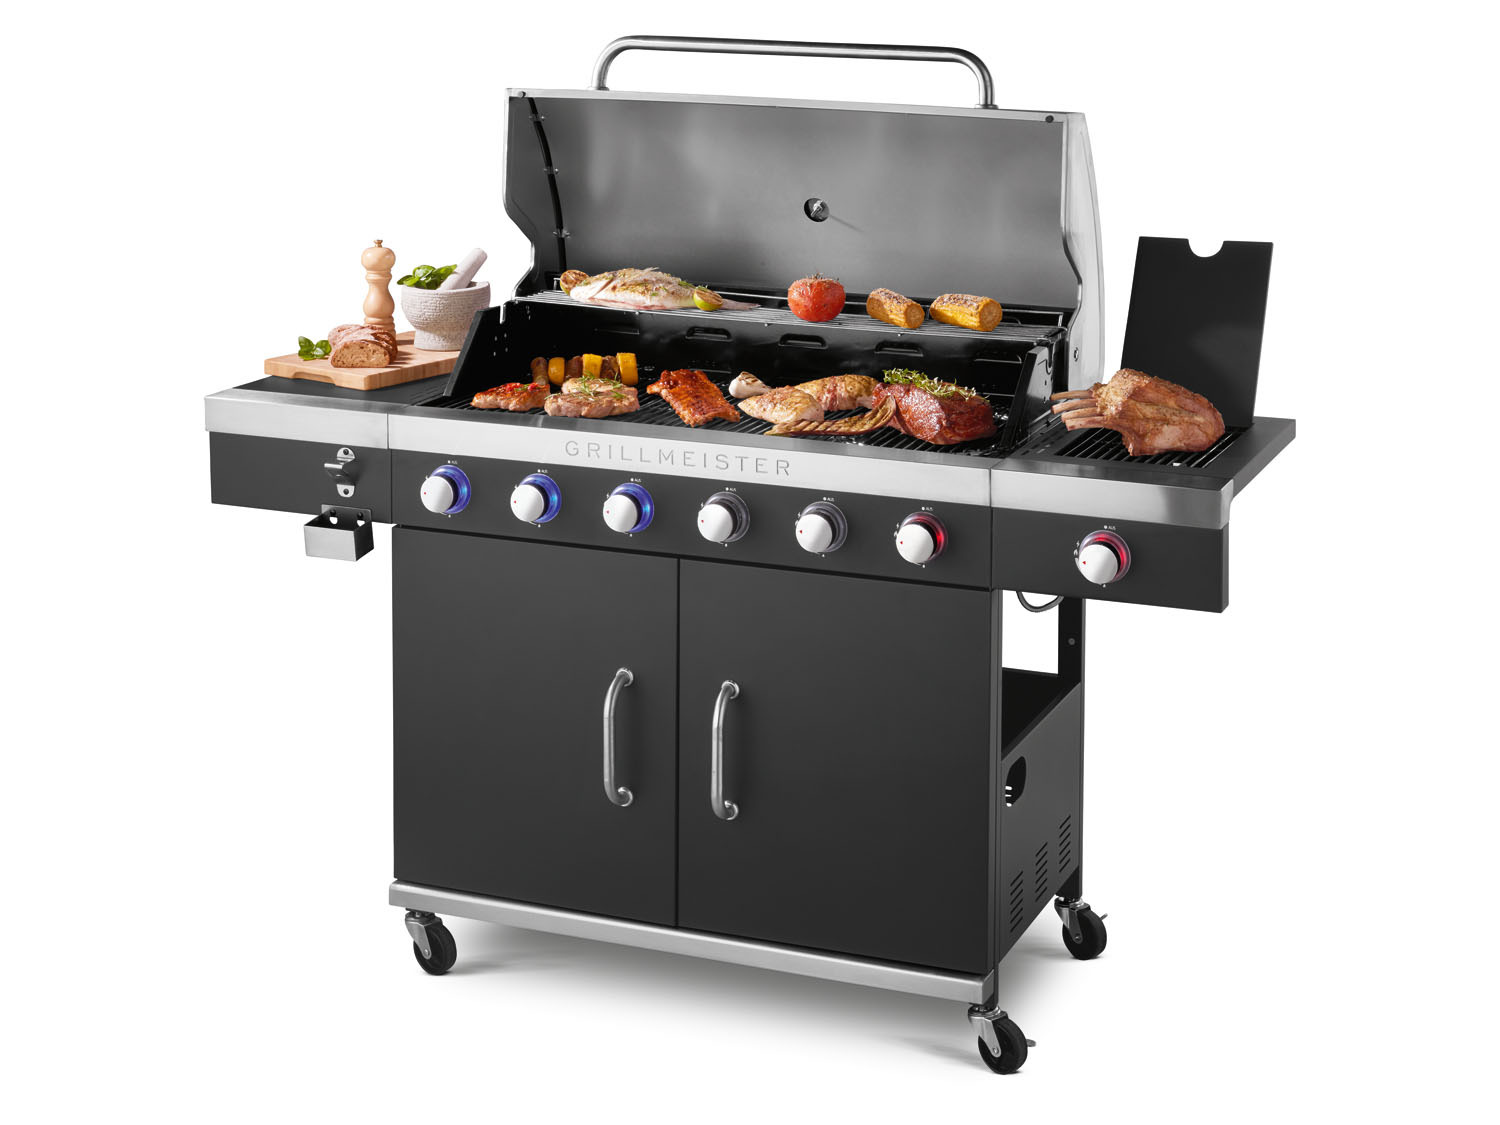 GRILLMEISTER Gasgrill, 6plus1 Brenner, 26,1 kW | LIDL